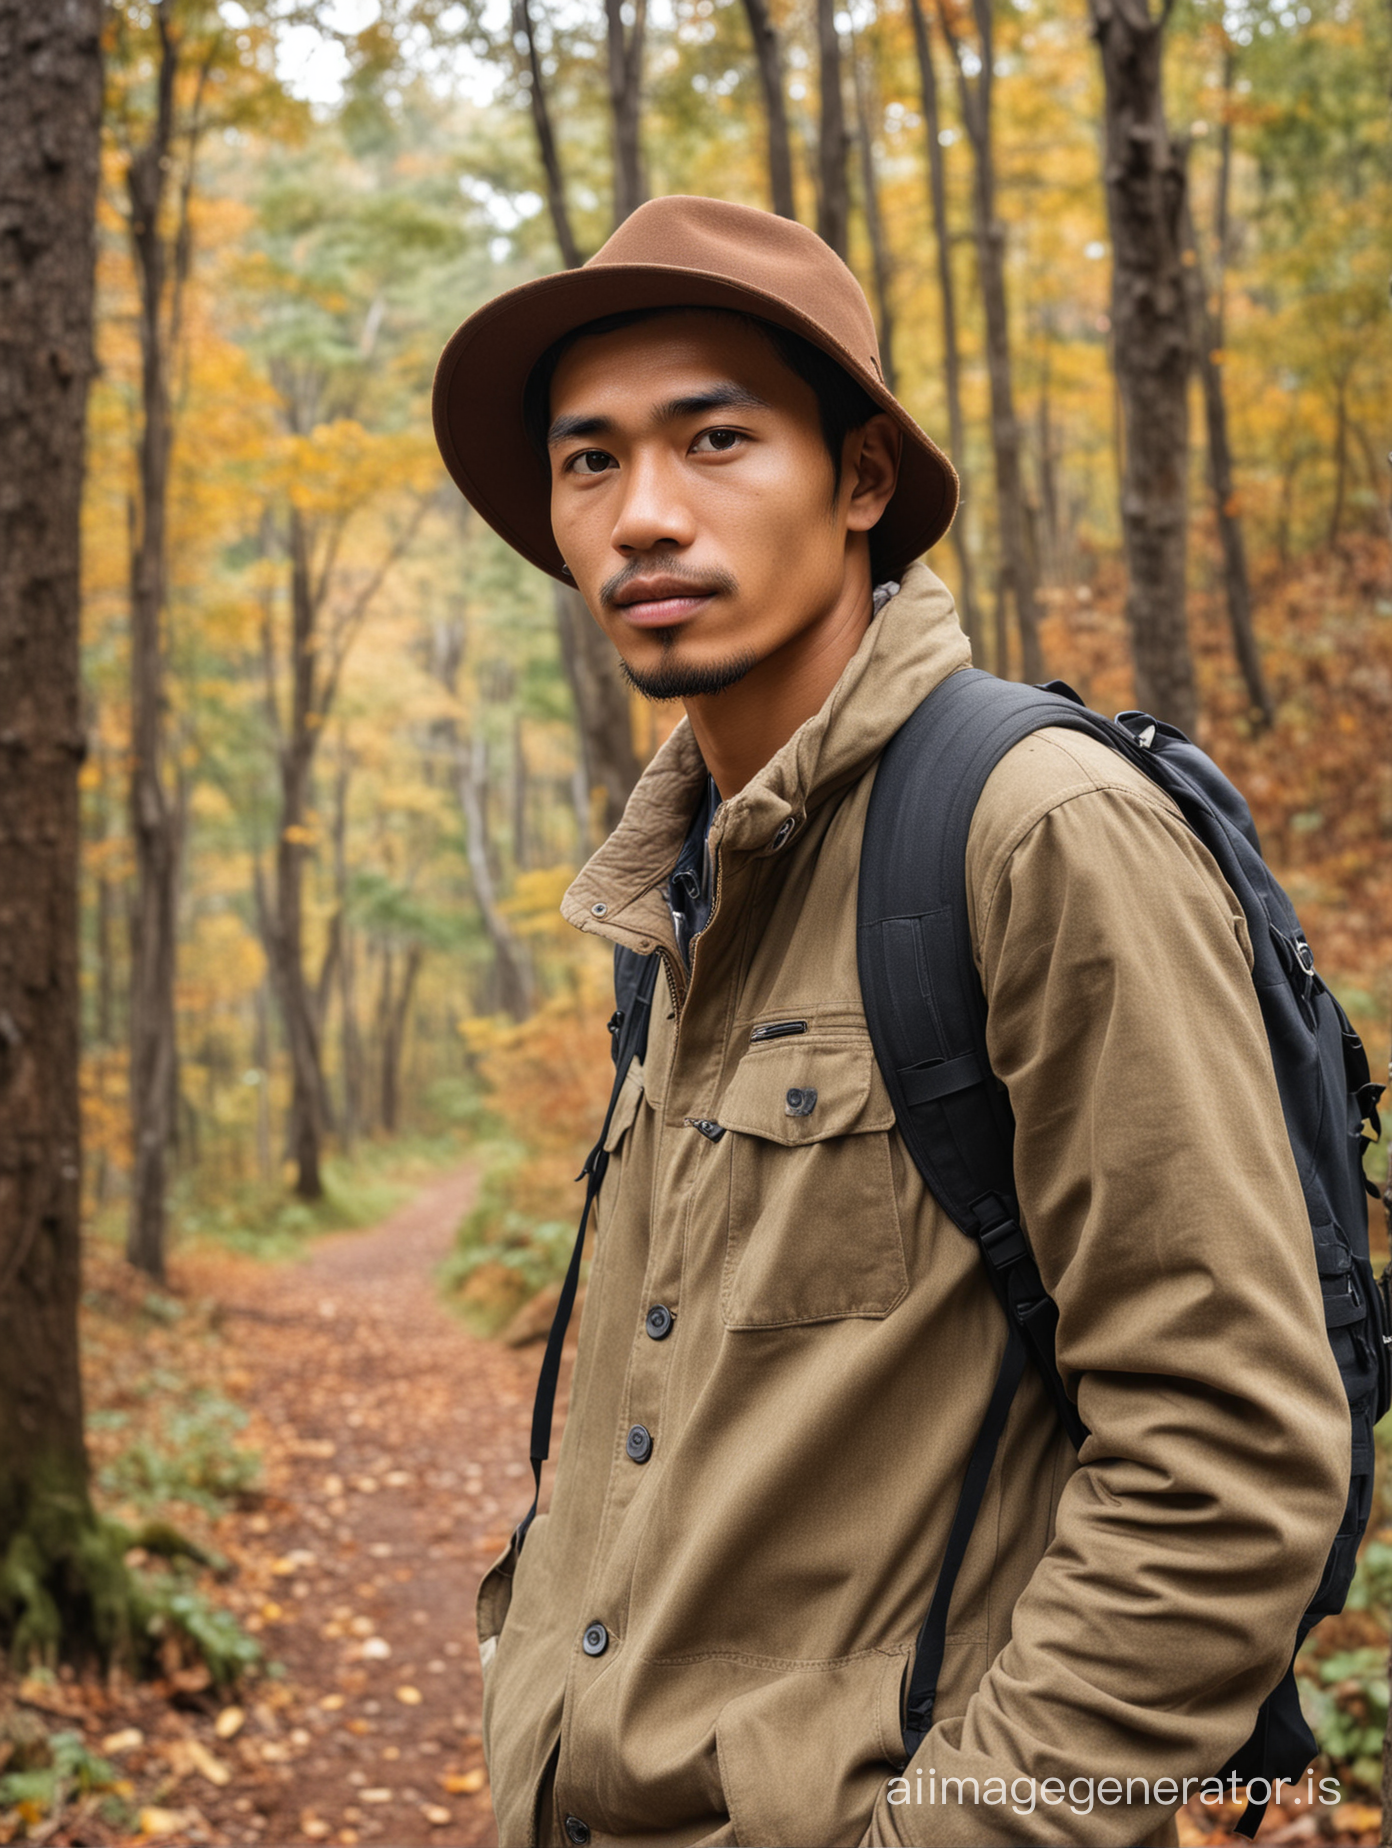 25 years old Indonesia man, wearing hat, outfit traveler, eye level angle, hiking, autumn forest